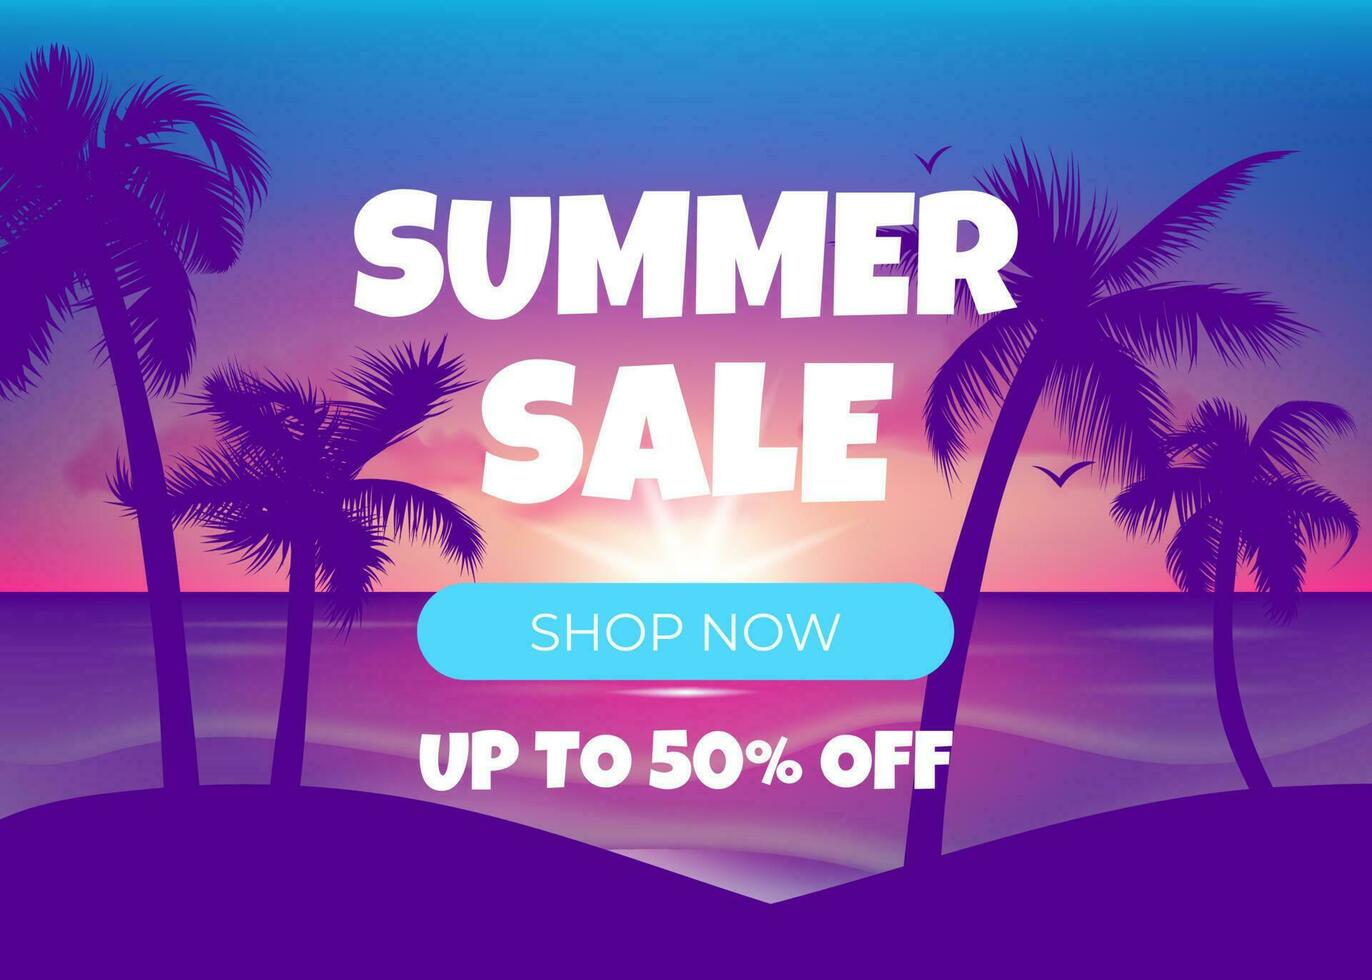 Tropical sunset banner with palm trees and sale offer. Landscape palm tree silhouettes against an abstract sun setting over the ocean. For summer travel discounts vector